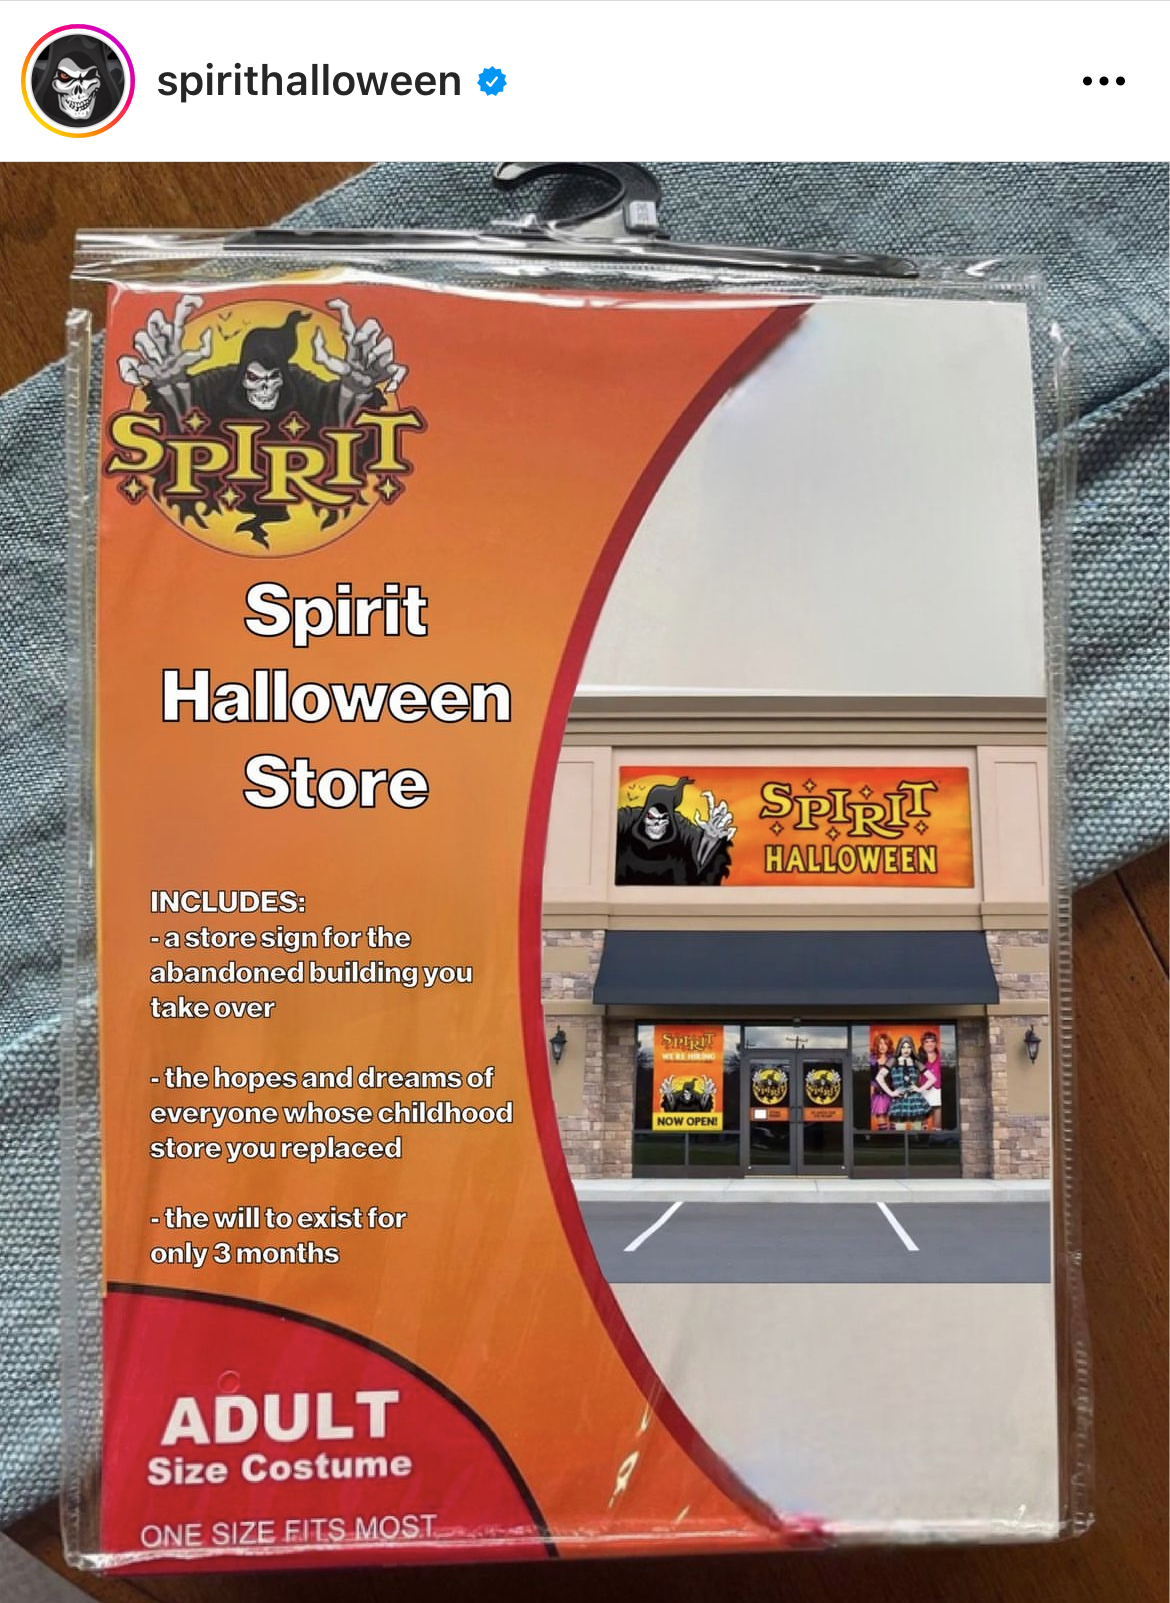 Costume Memes - spirit halloween - spirithalloween Spirit Spirit Halloween Store Includes castore sign for the abandoned building you take over the hopes and dreams of everyone whose childhood store you replaced the will to exist for only 3 months Adult S